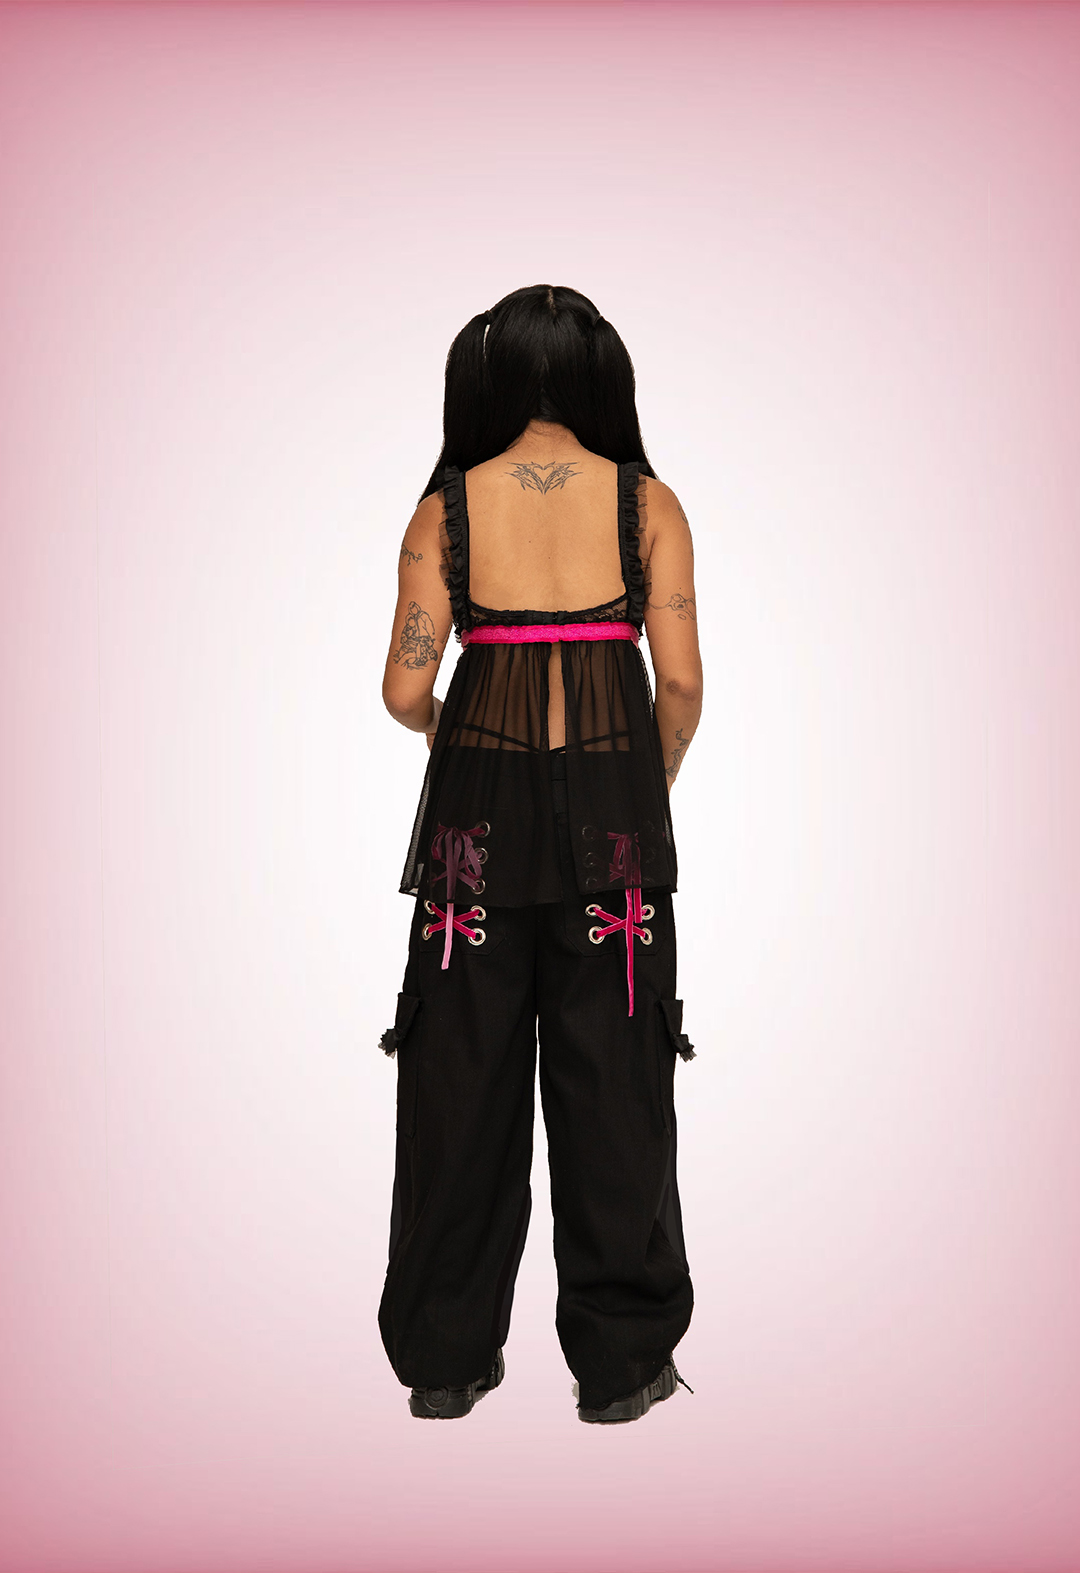 This is a back view image of me modeling the top and pants against a faded pink-and-white background. 